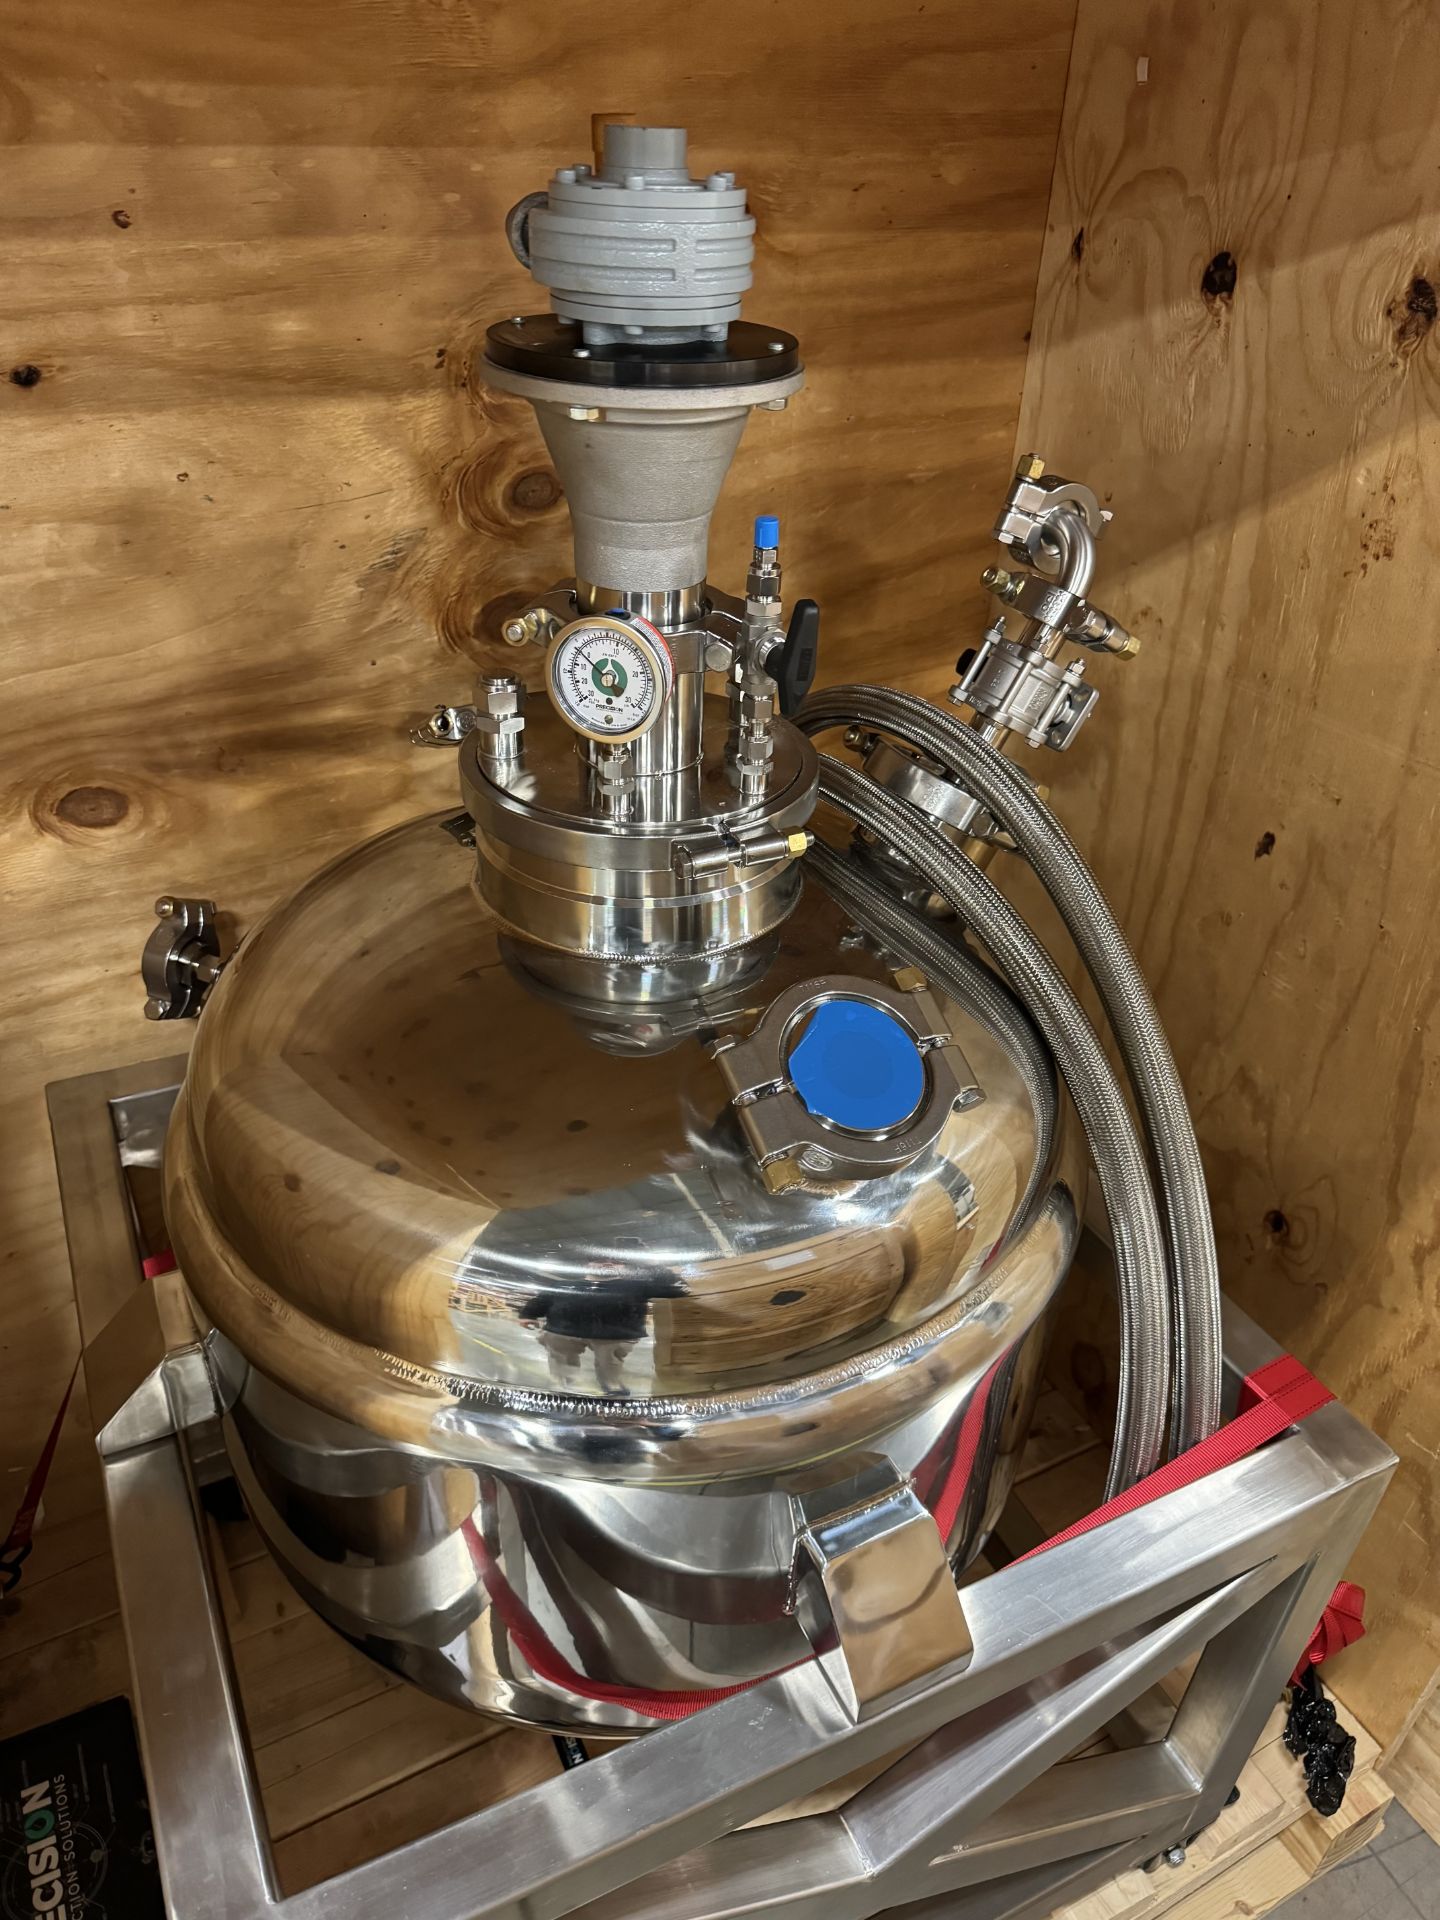 New/Unused Precision Extraction Solutions 100 L Multi-Use Reactor Vessel. Model RV-100. - Image 4 of 7